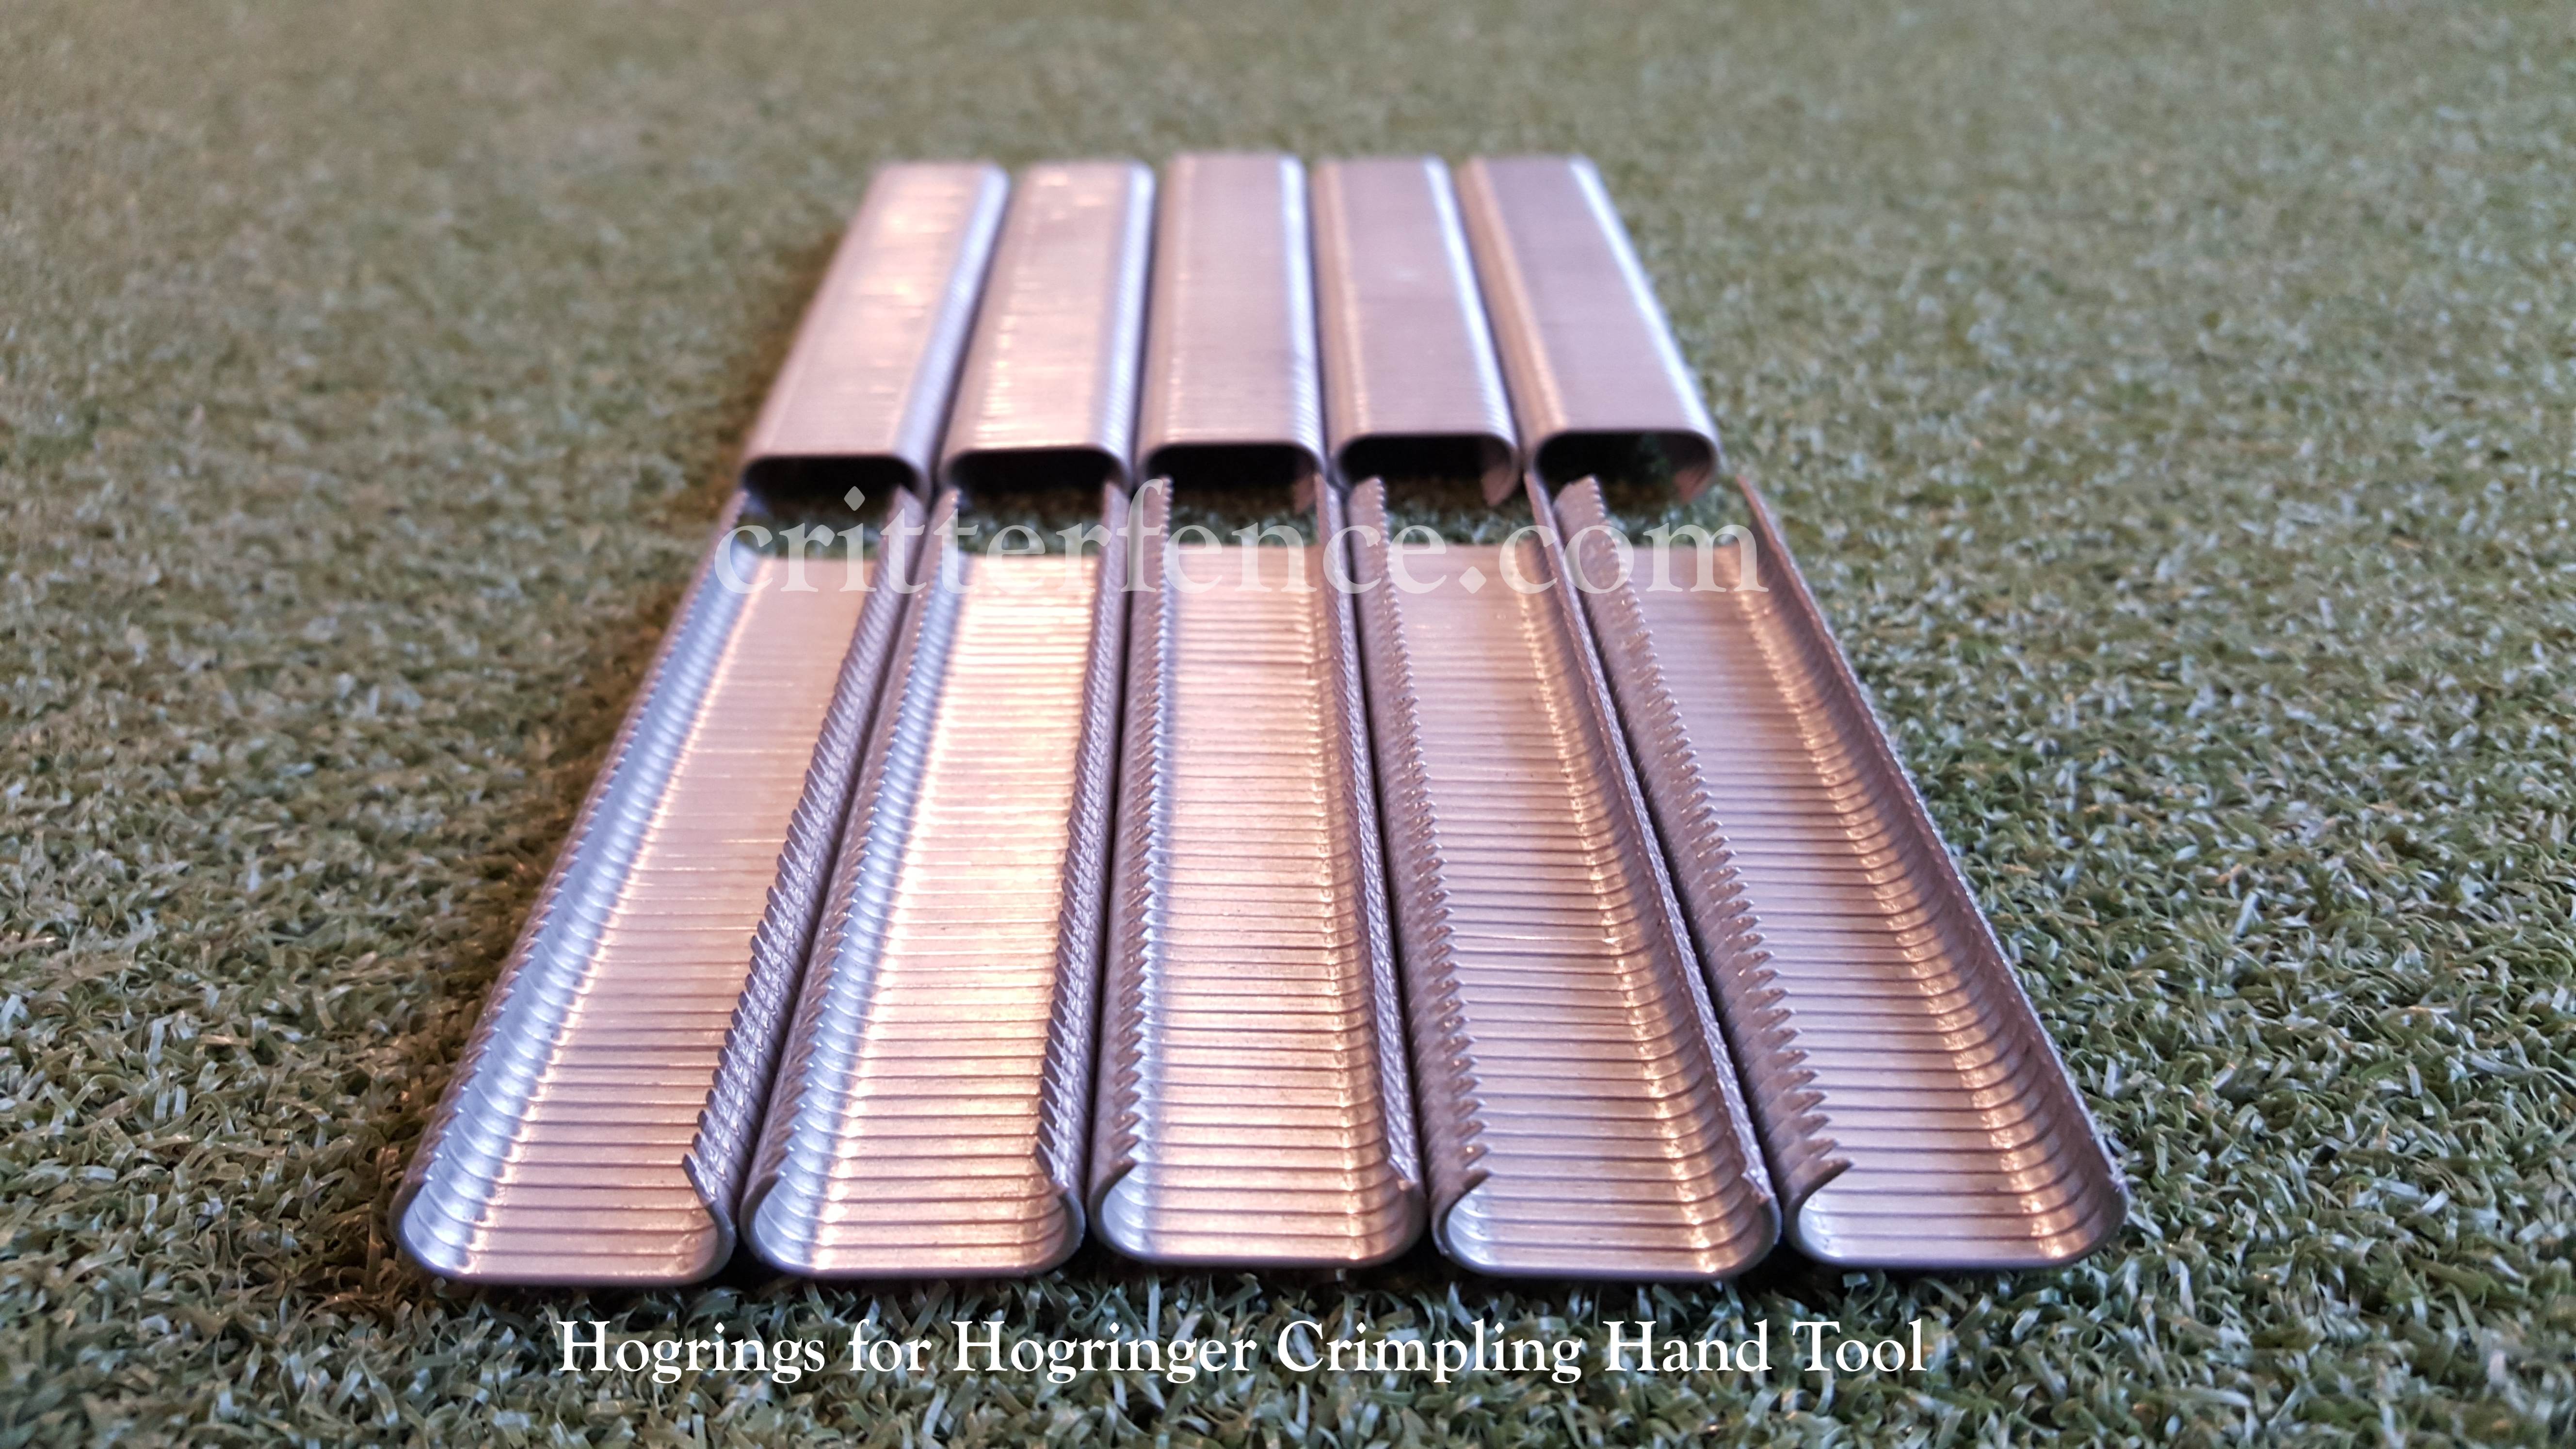 COLLATED Details about   HOG RING TOOL AND 9/16 STAINLESS STEEL HOG RINGS 2500 